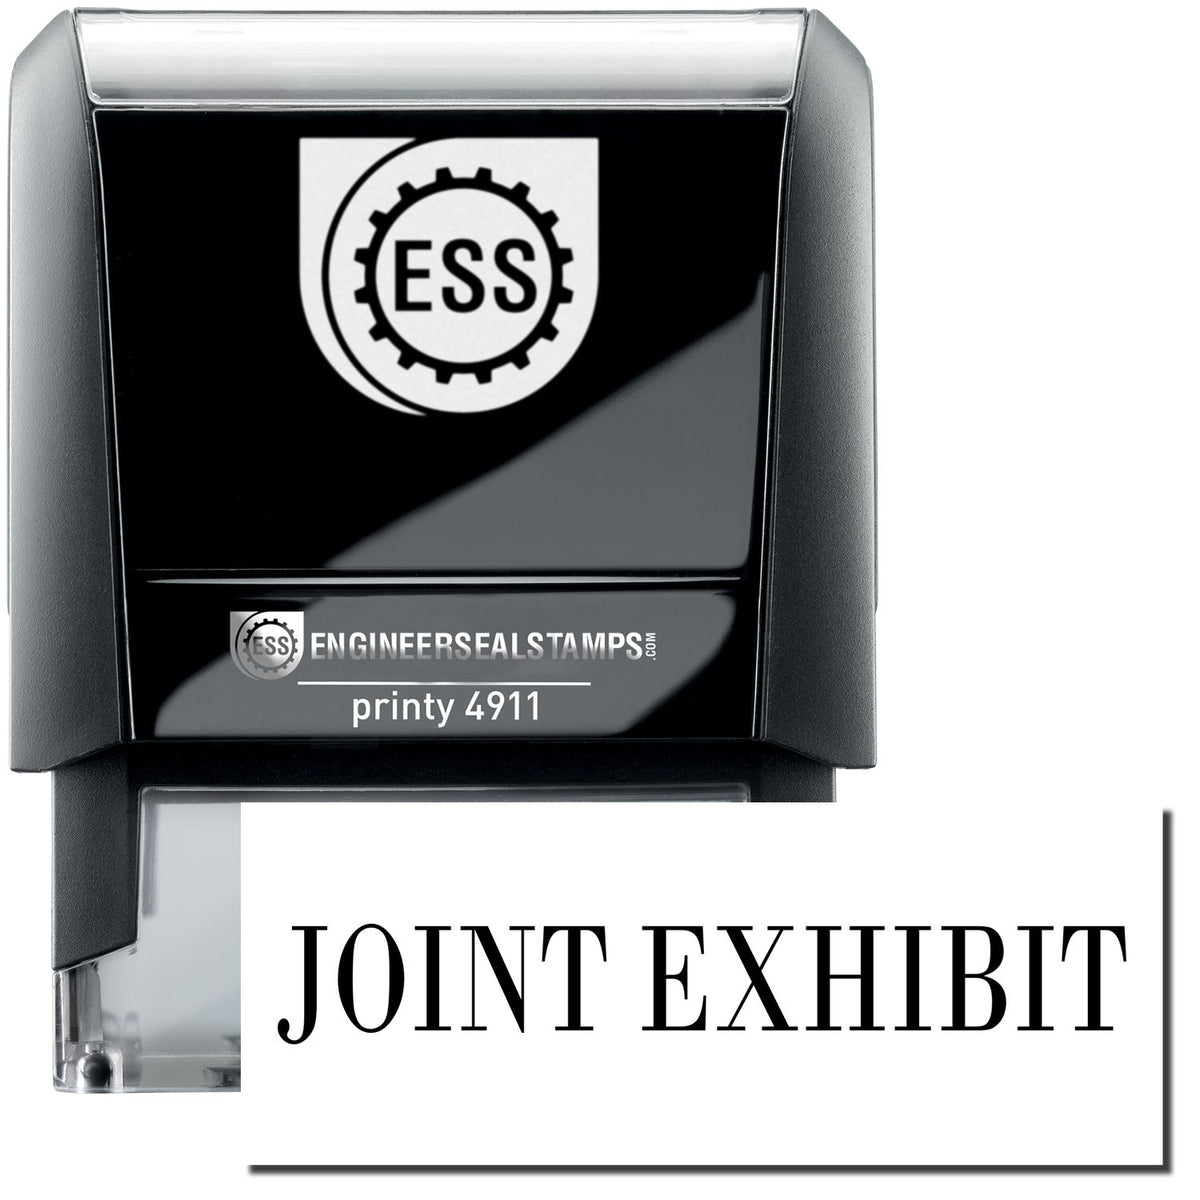 A self-inking stamp with a stamped image showing how the text &quot;JOINT EXHIBIT&quot; is displayed after stamping.